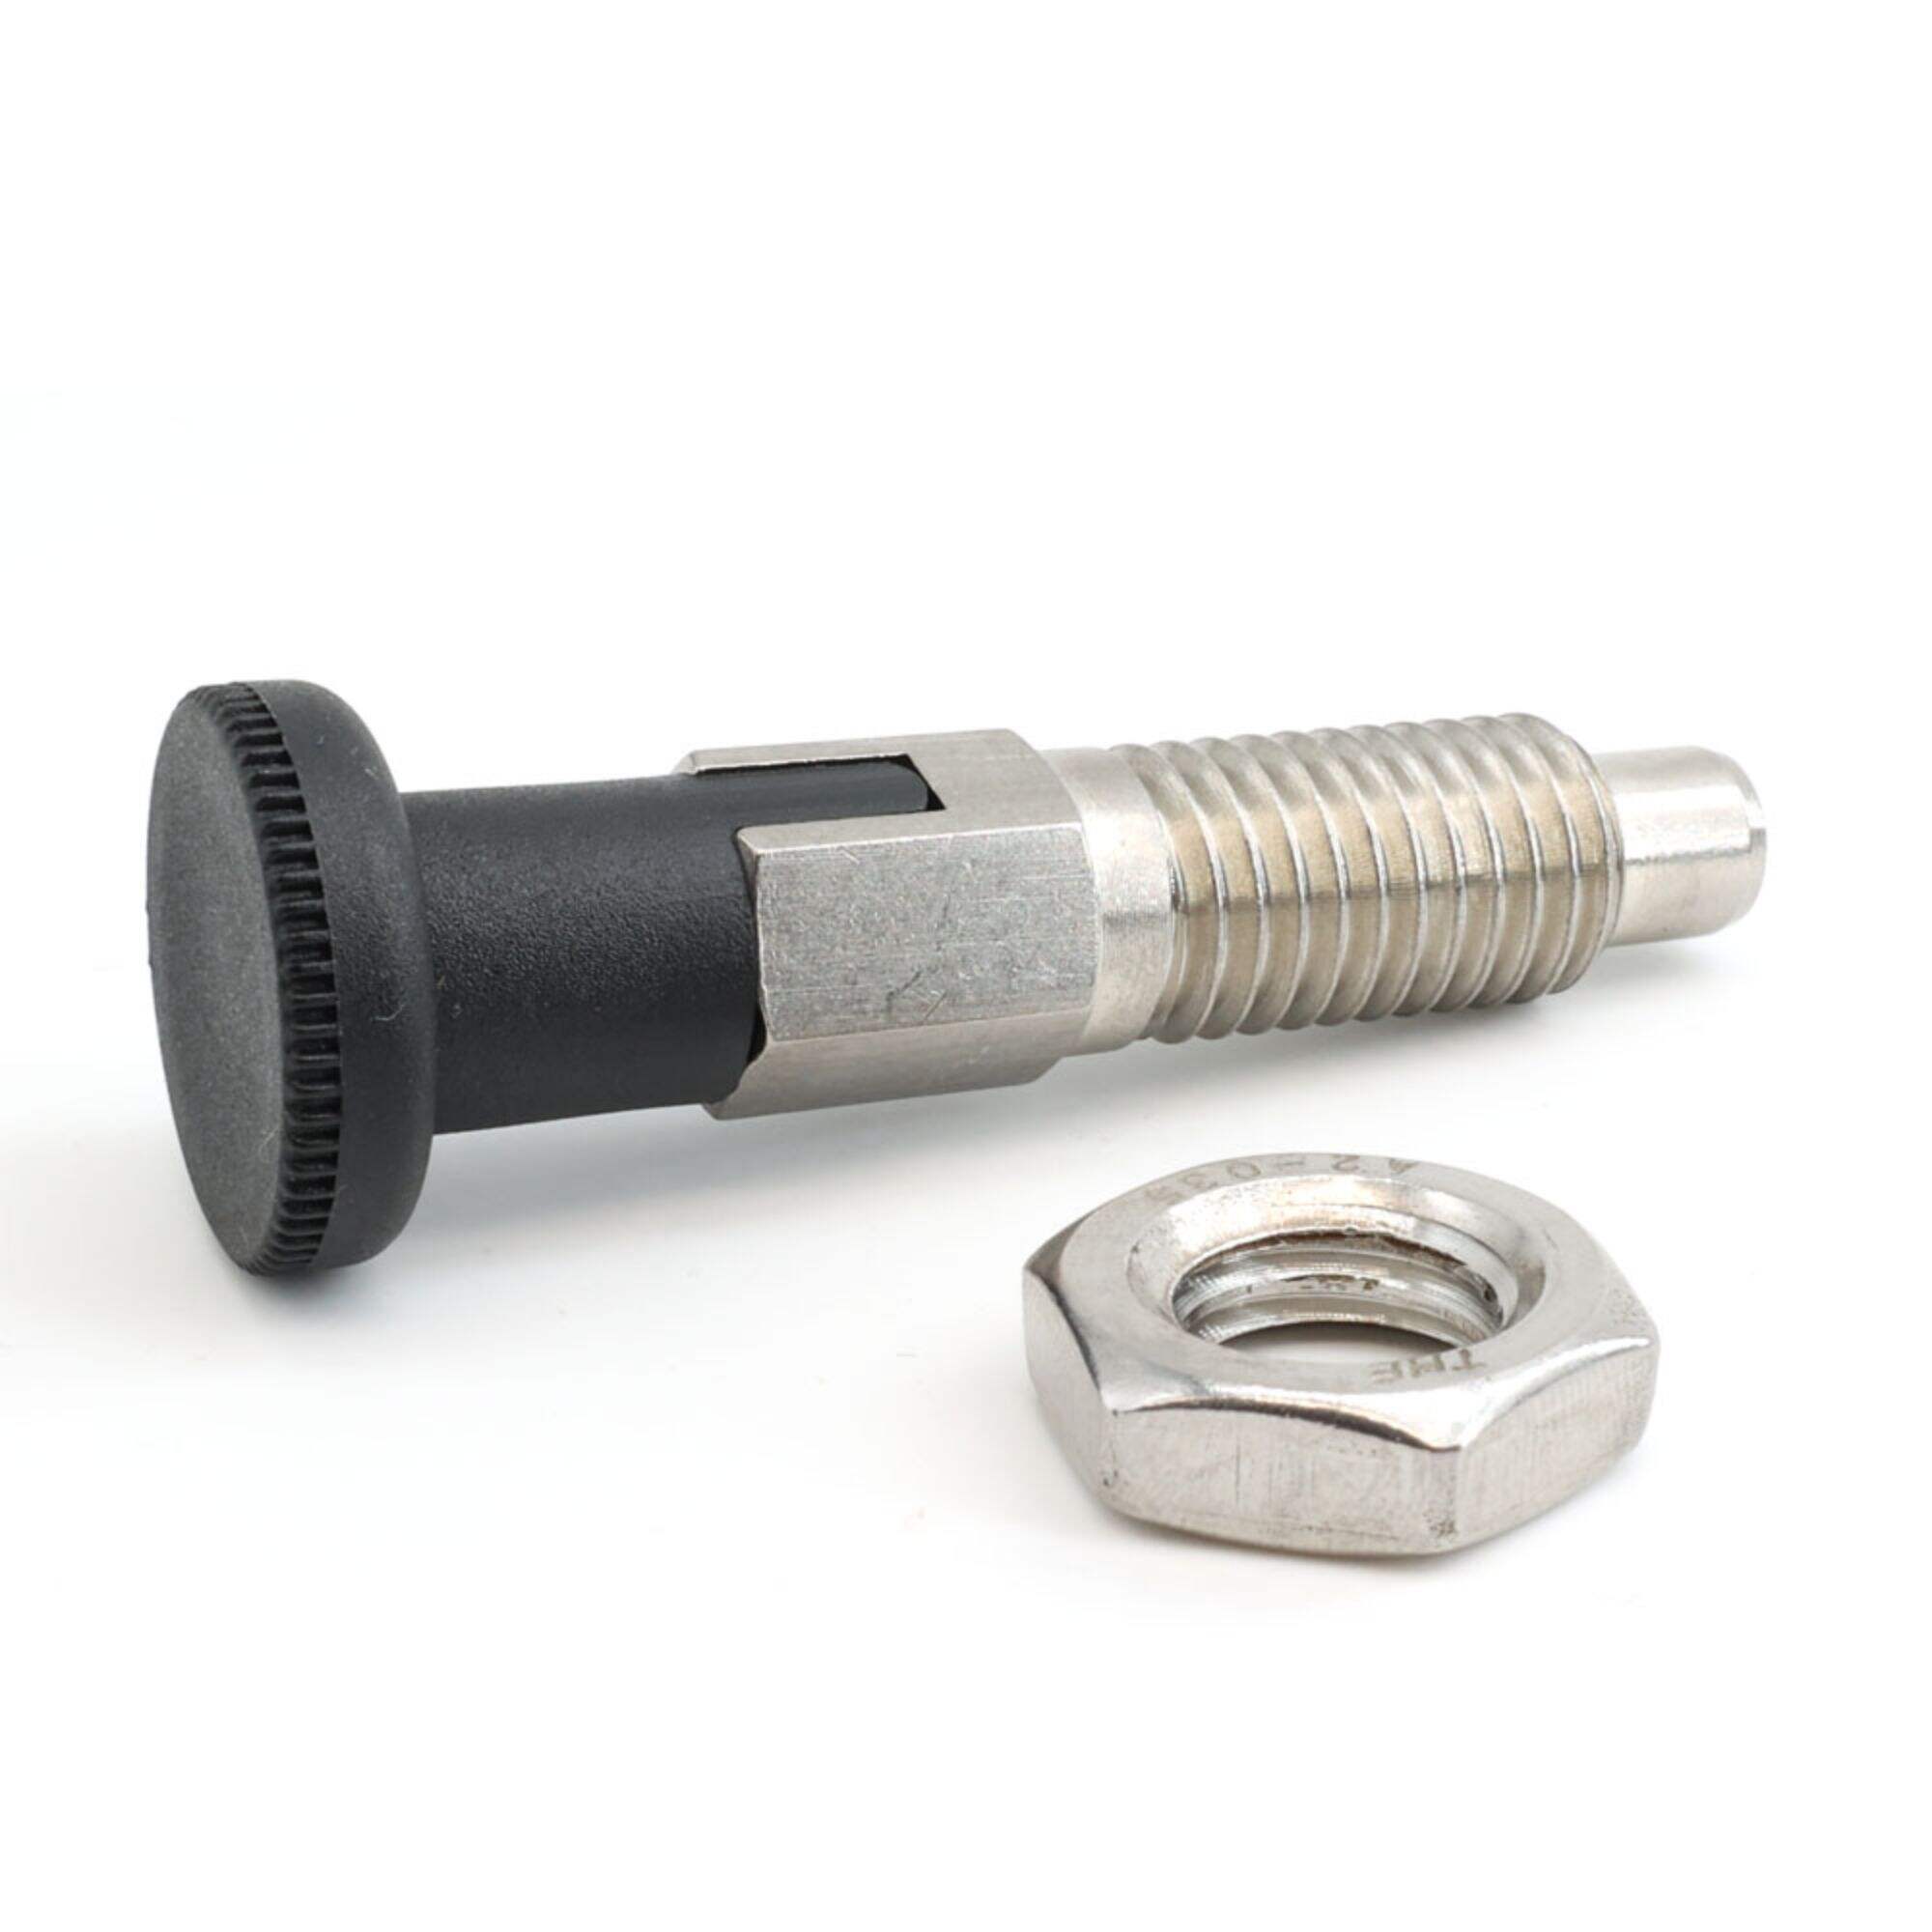 Spring Loaded Knurled Knob Head M6 Lock Out Hand Retractable Indexing Plunger